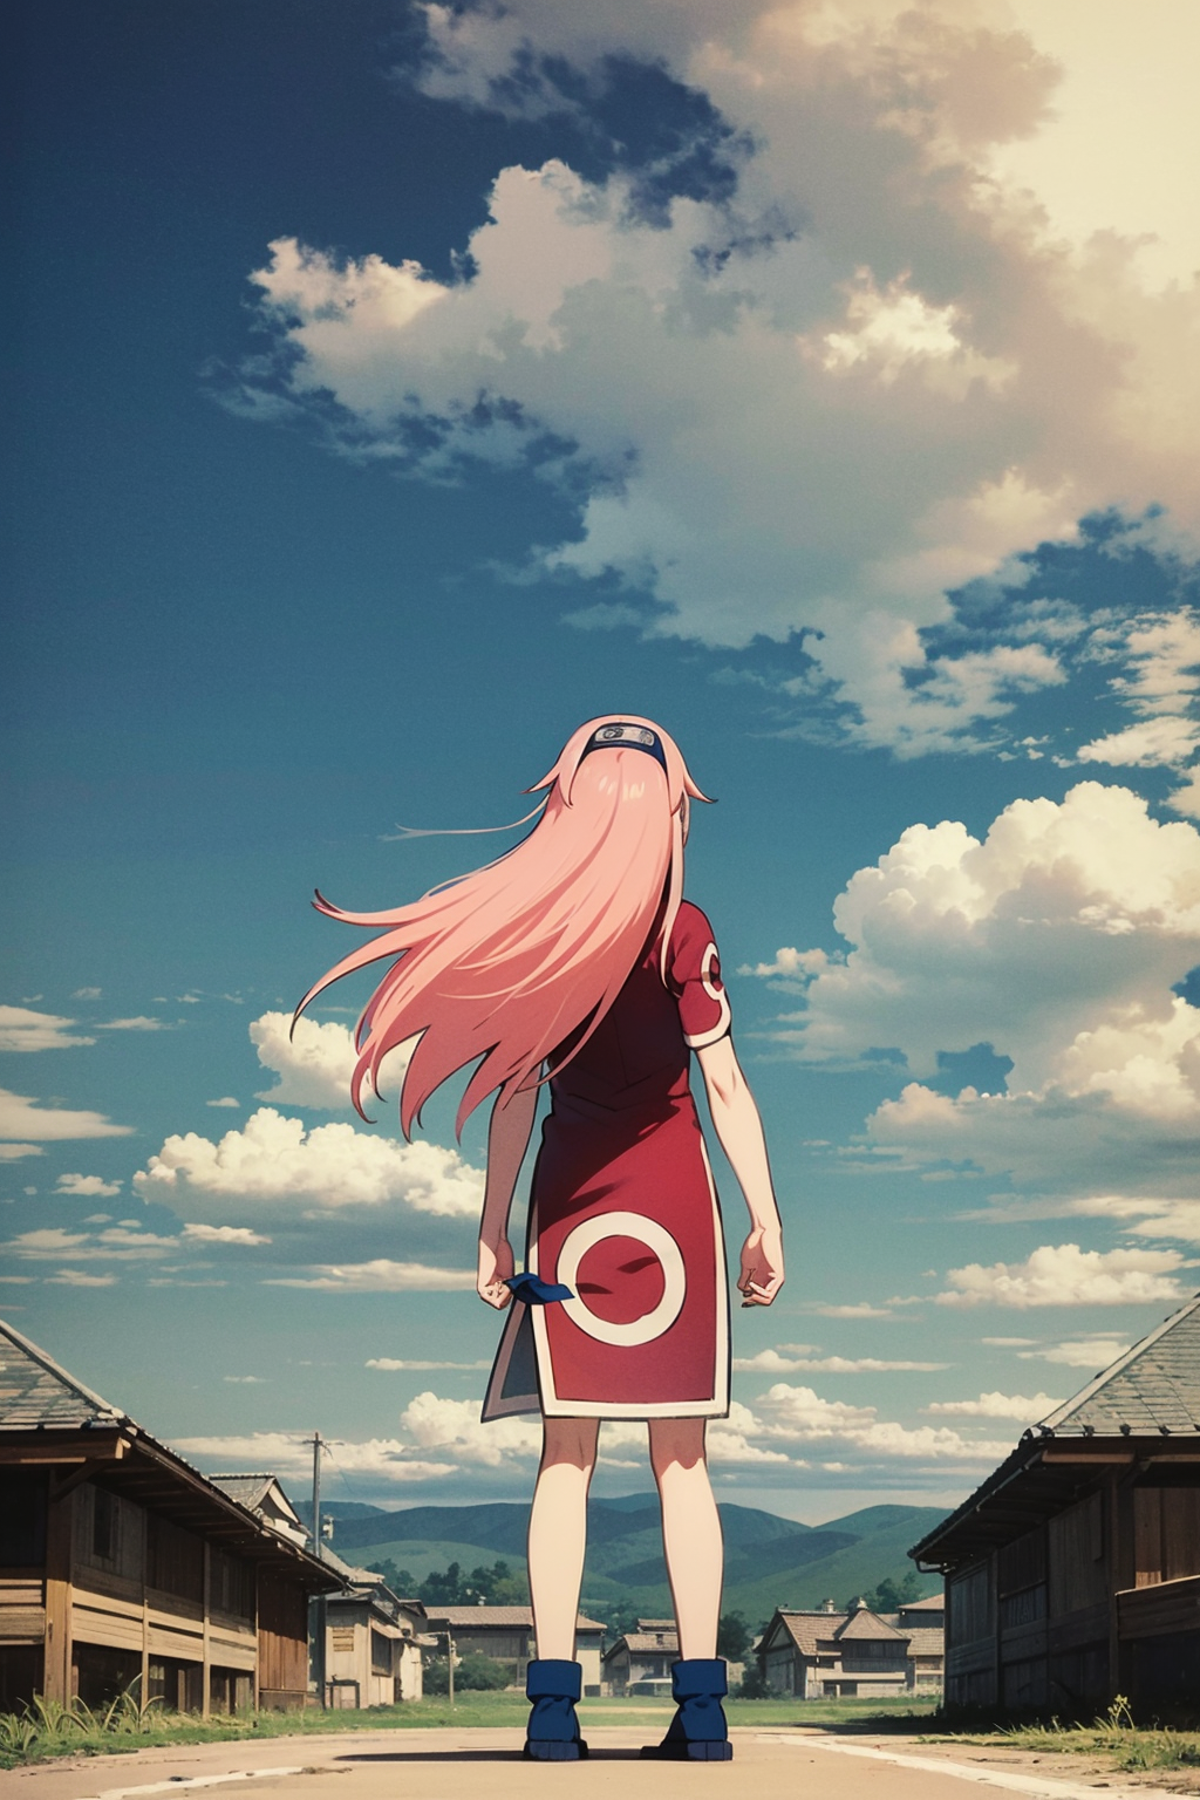 Anime character with pink hair and a blue dress holding a sword.